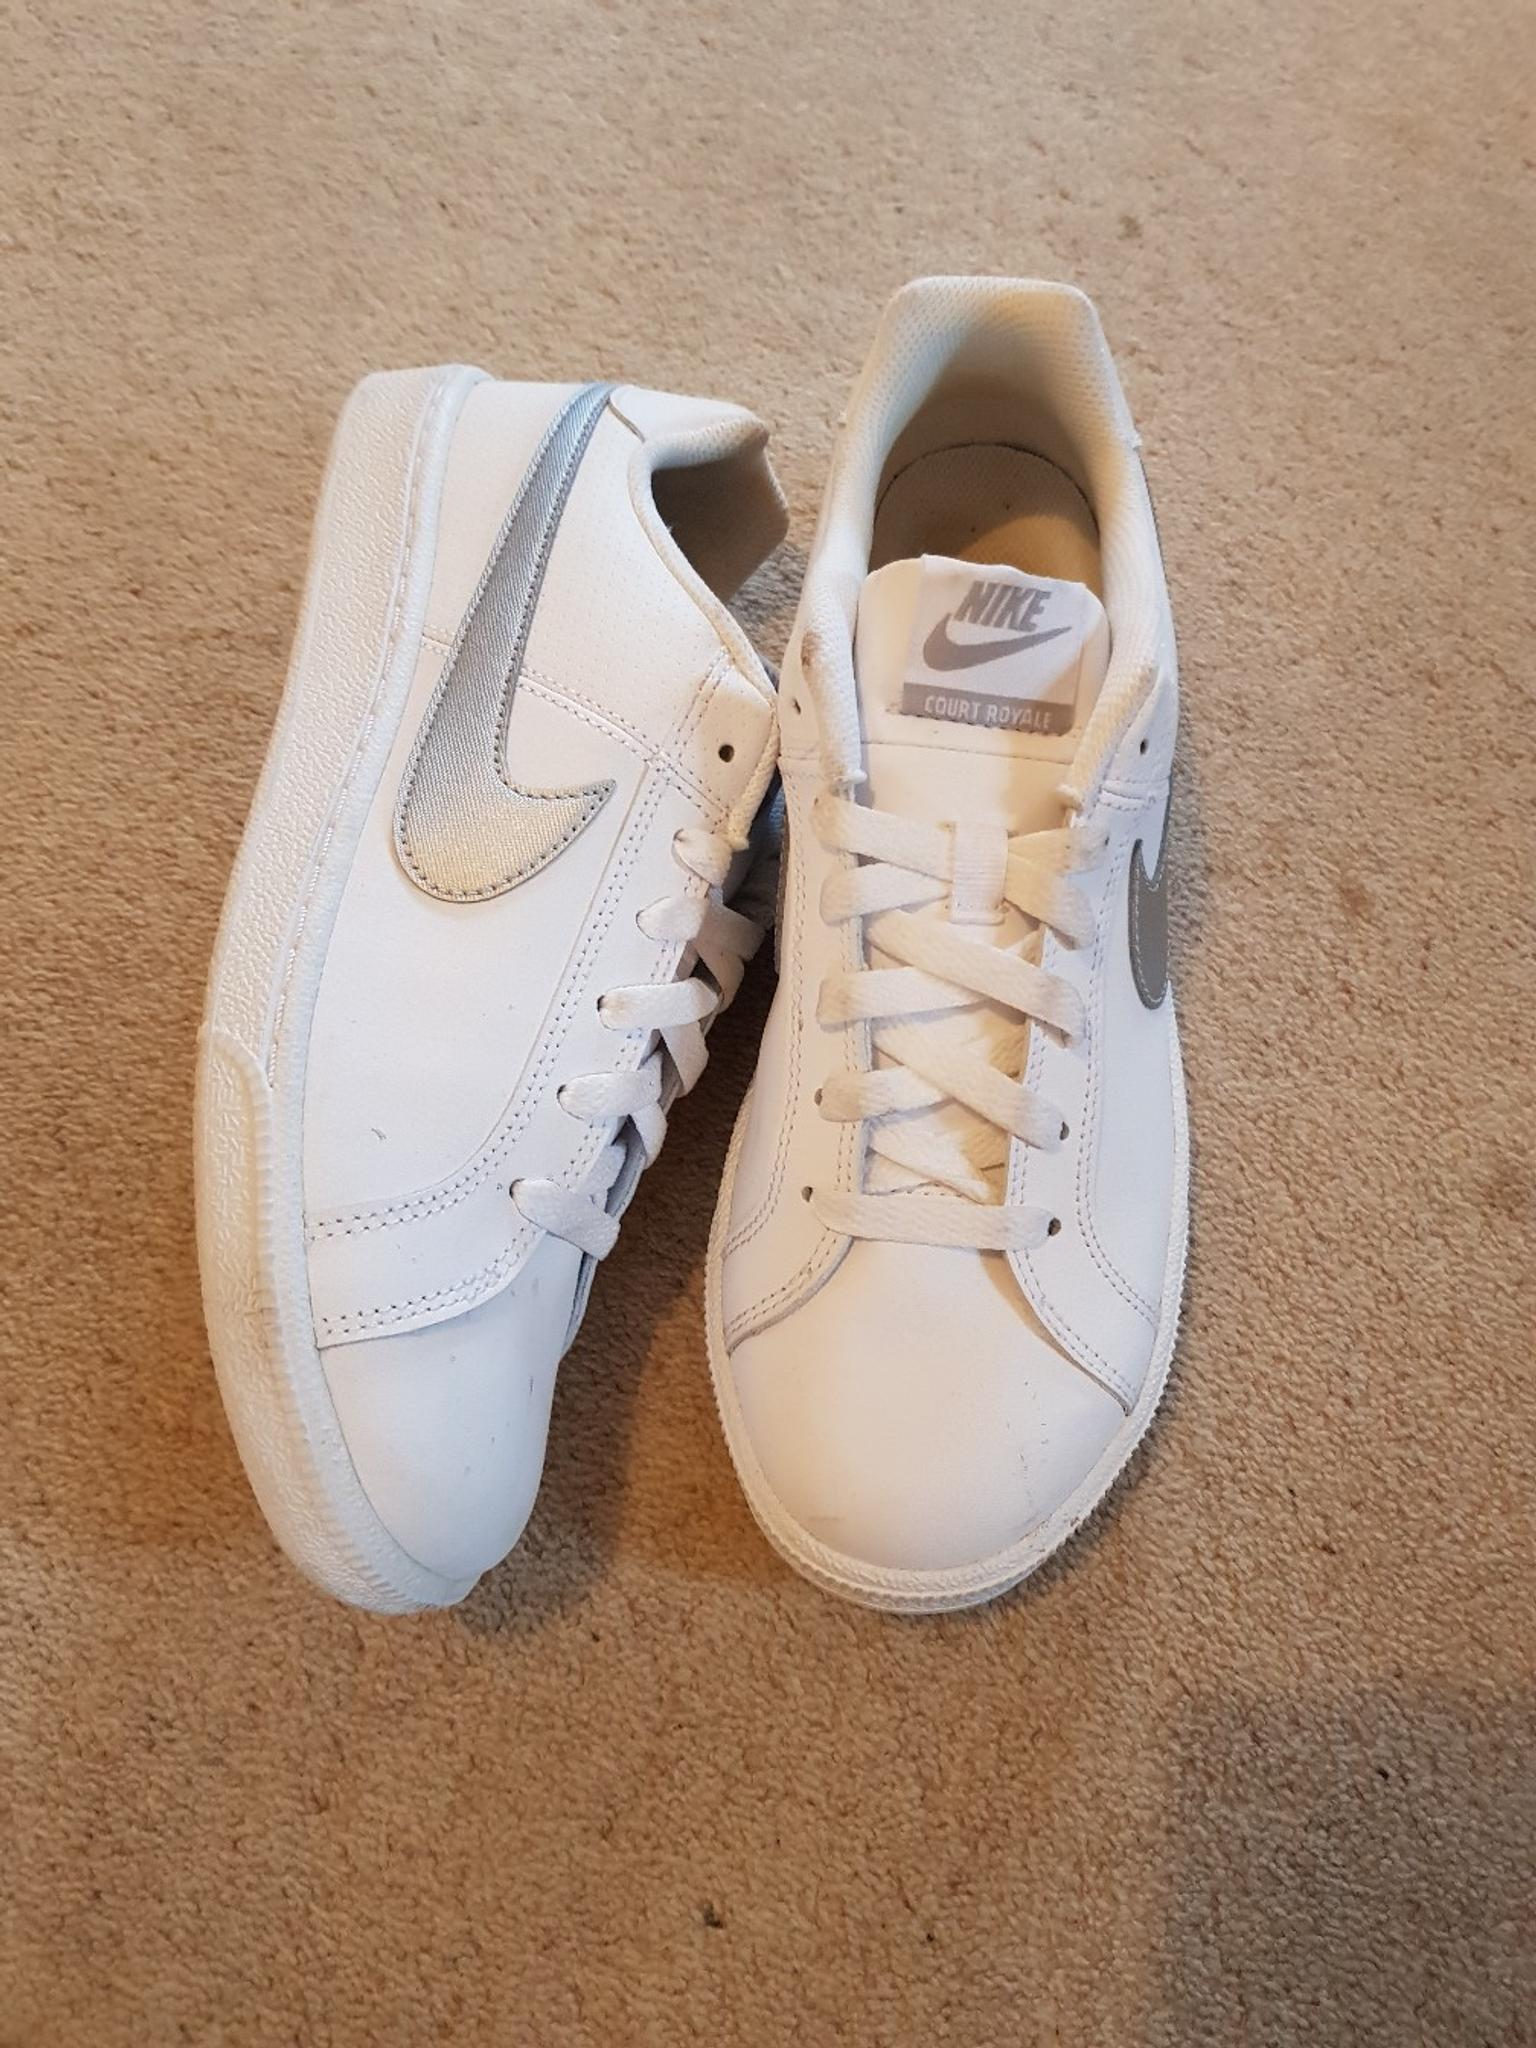 ladies size 6 nike trainers